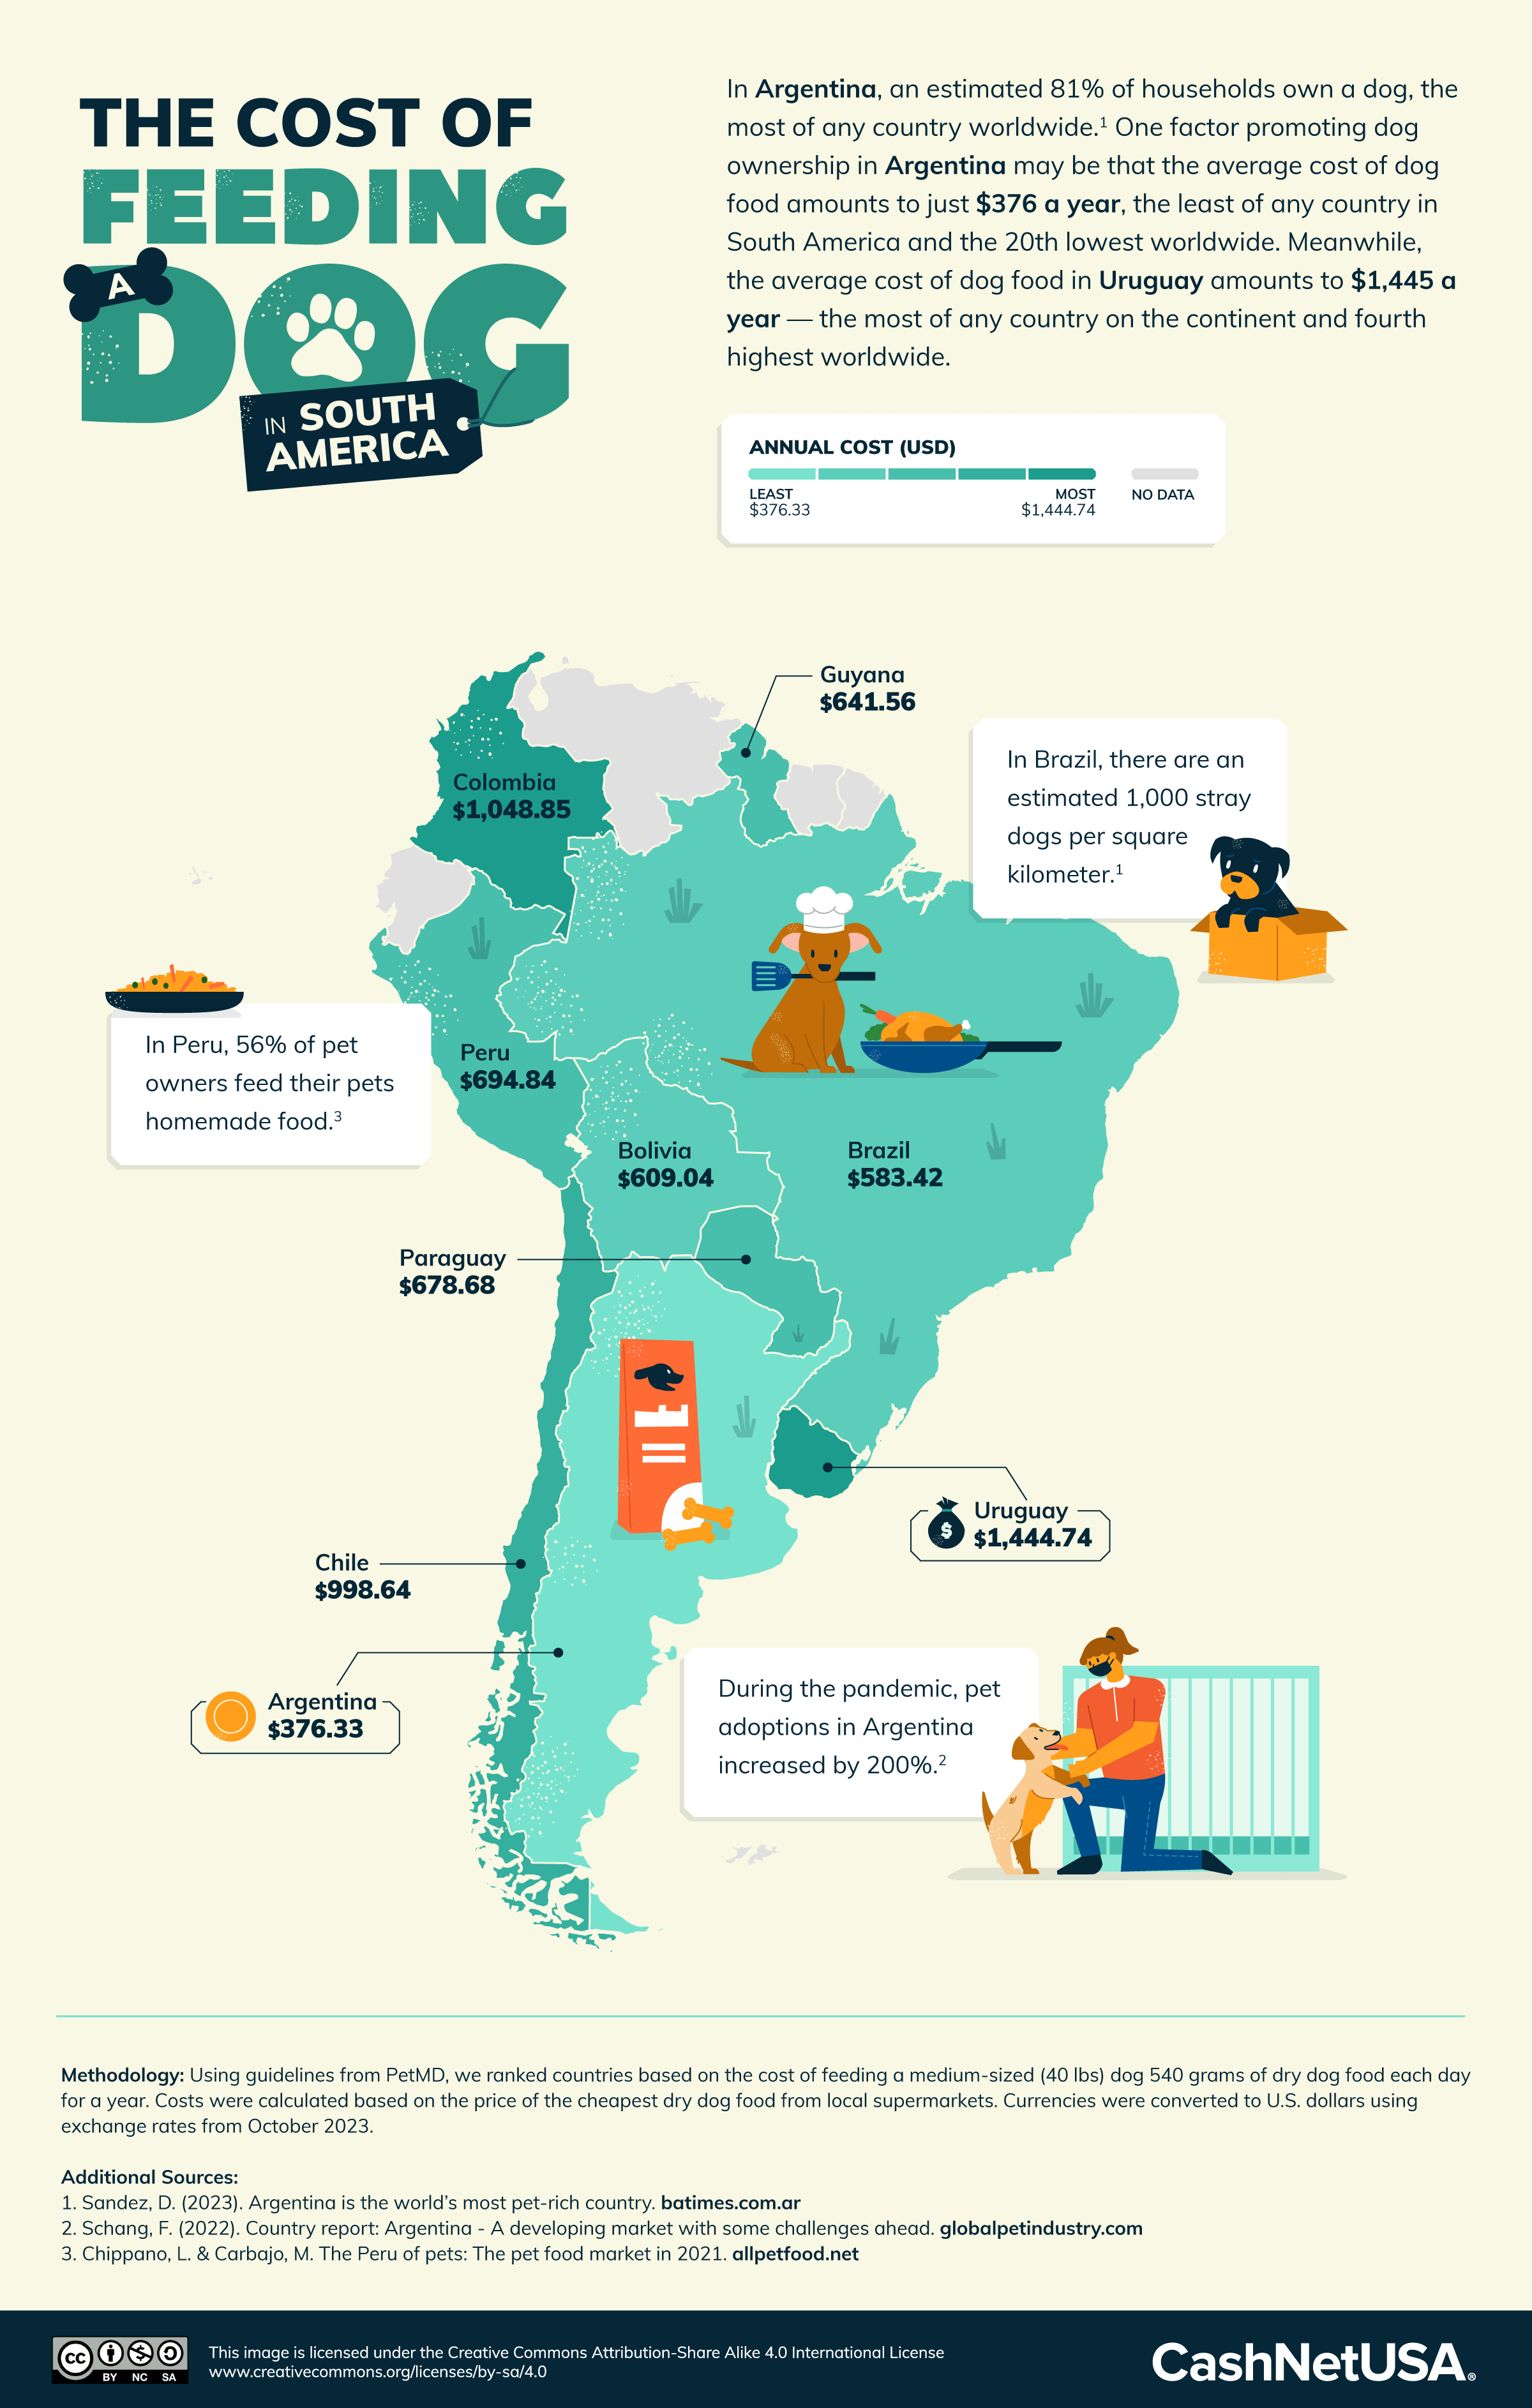 Infographic of the cost of feeding a dog in South America.